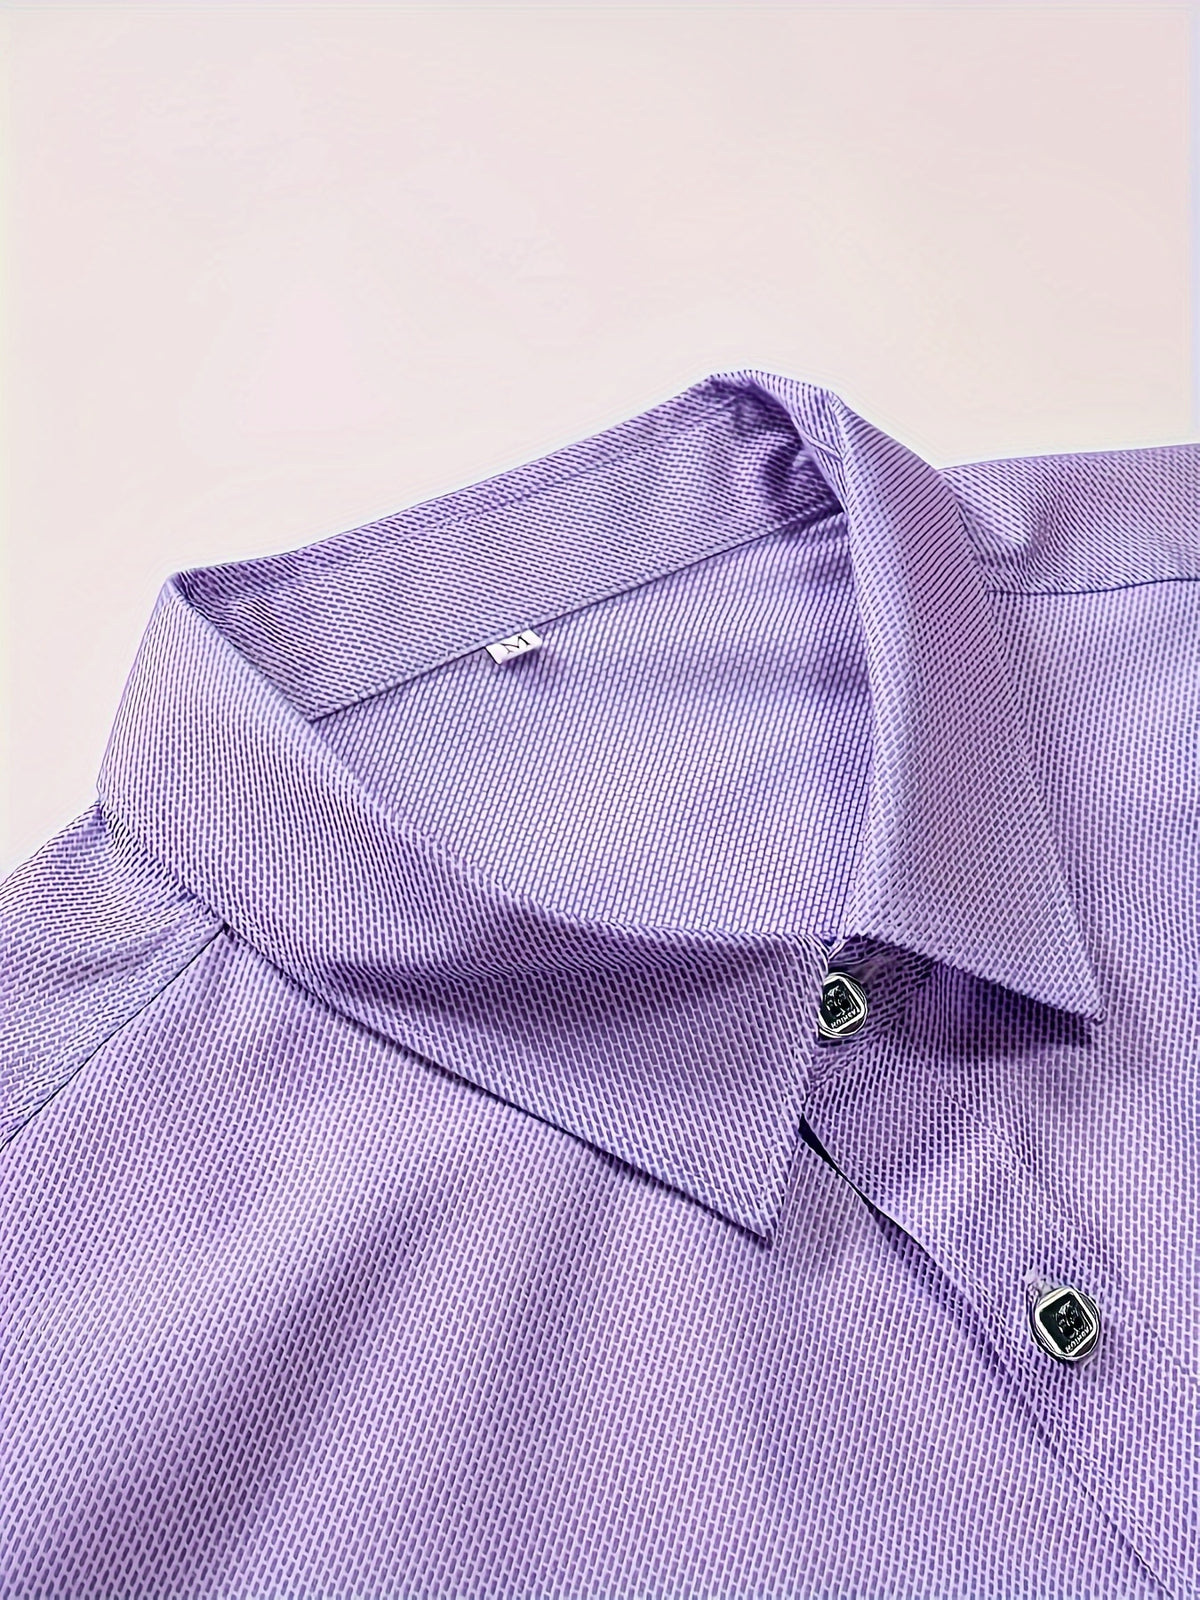 a close up of a purple shirt on a white background